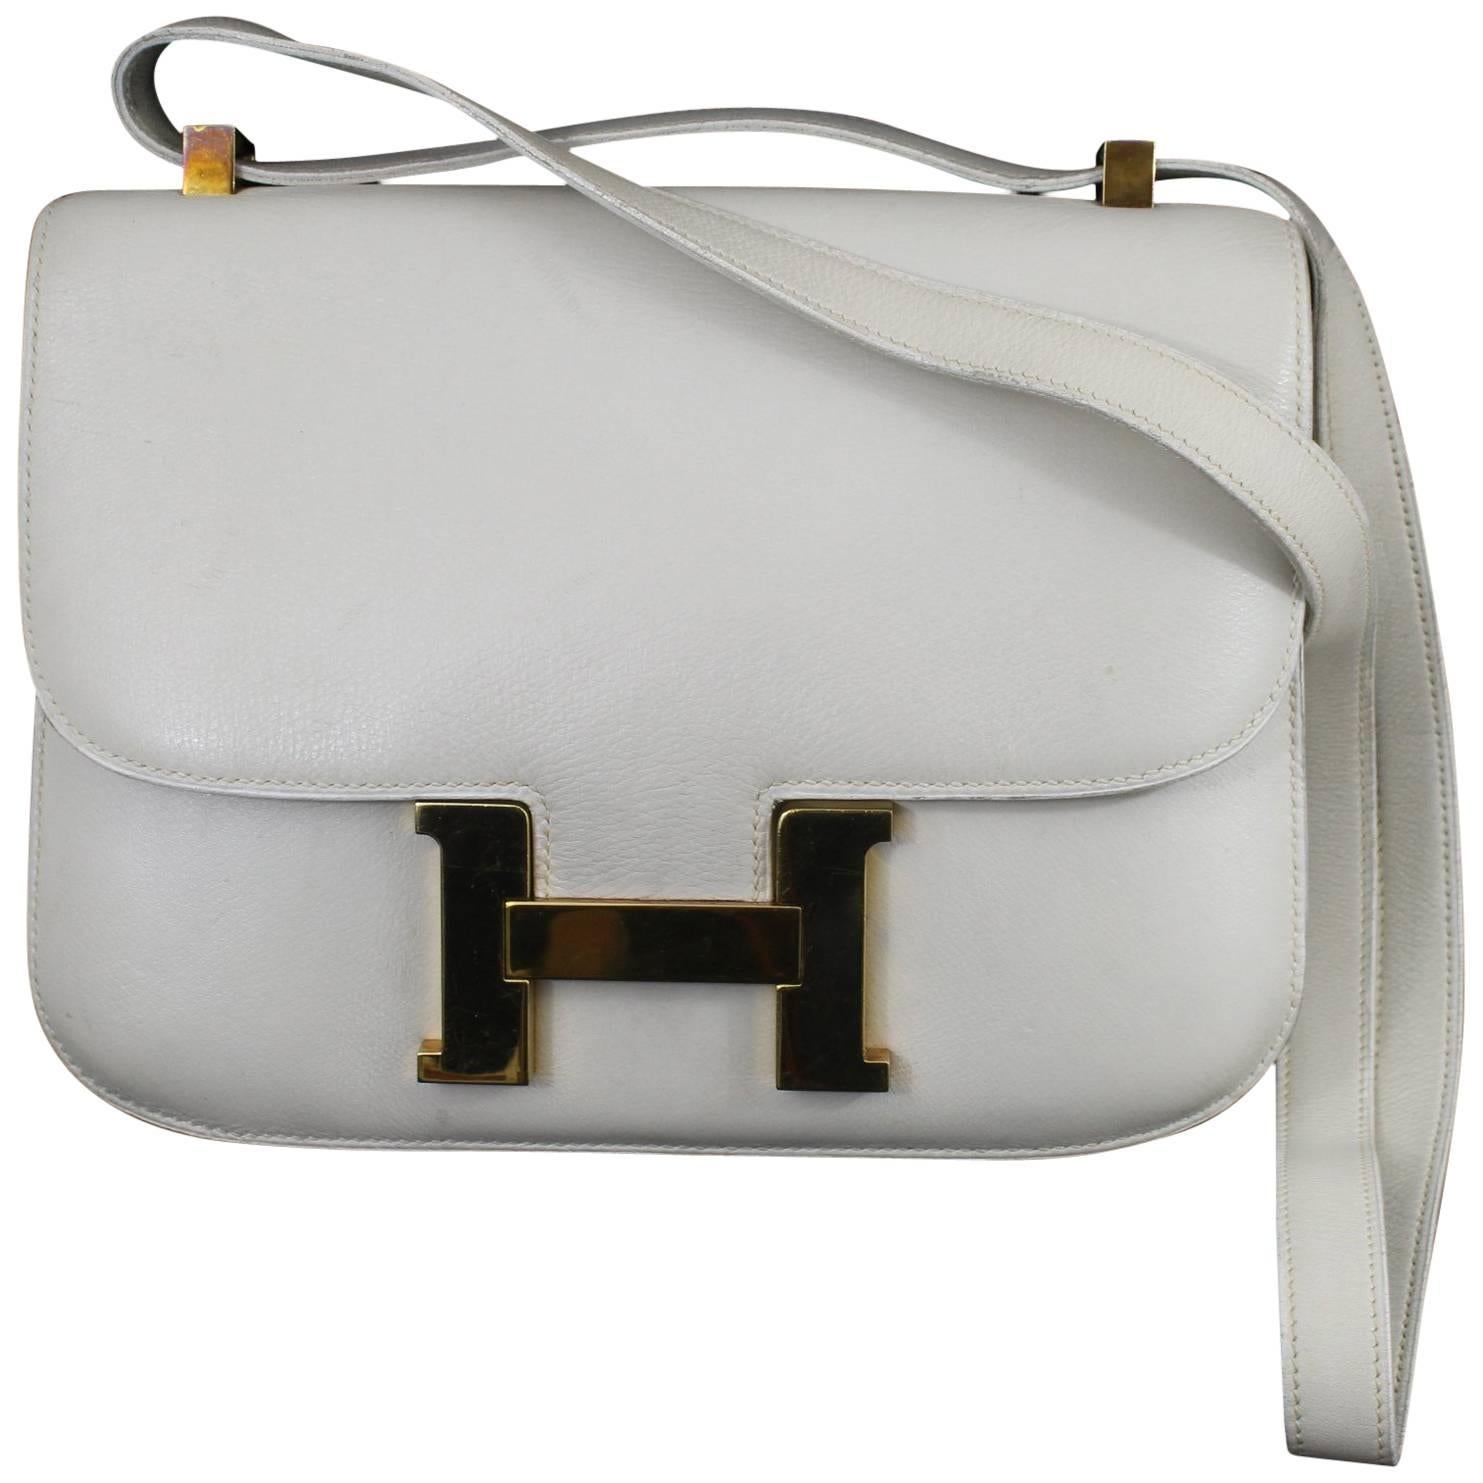 Hermes Vintage Constance Bag in White Grained Togo  Leather